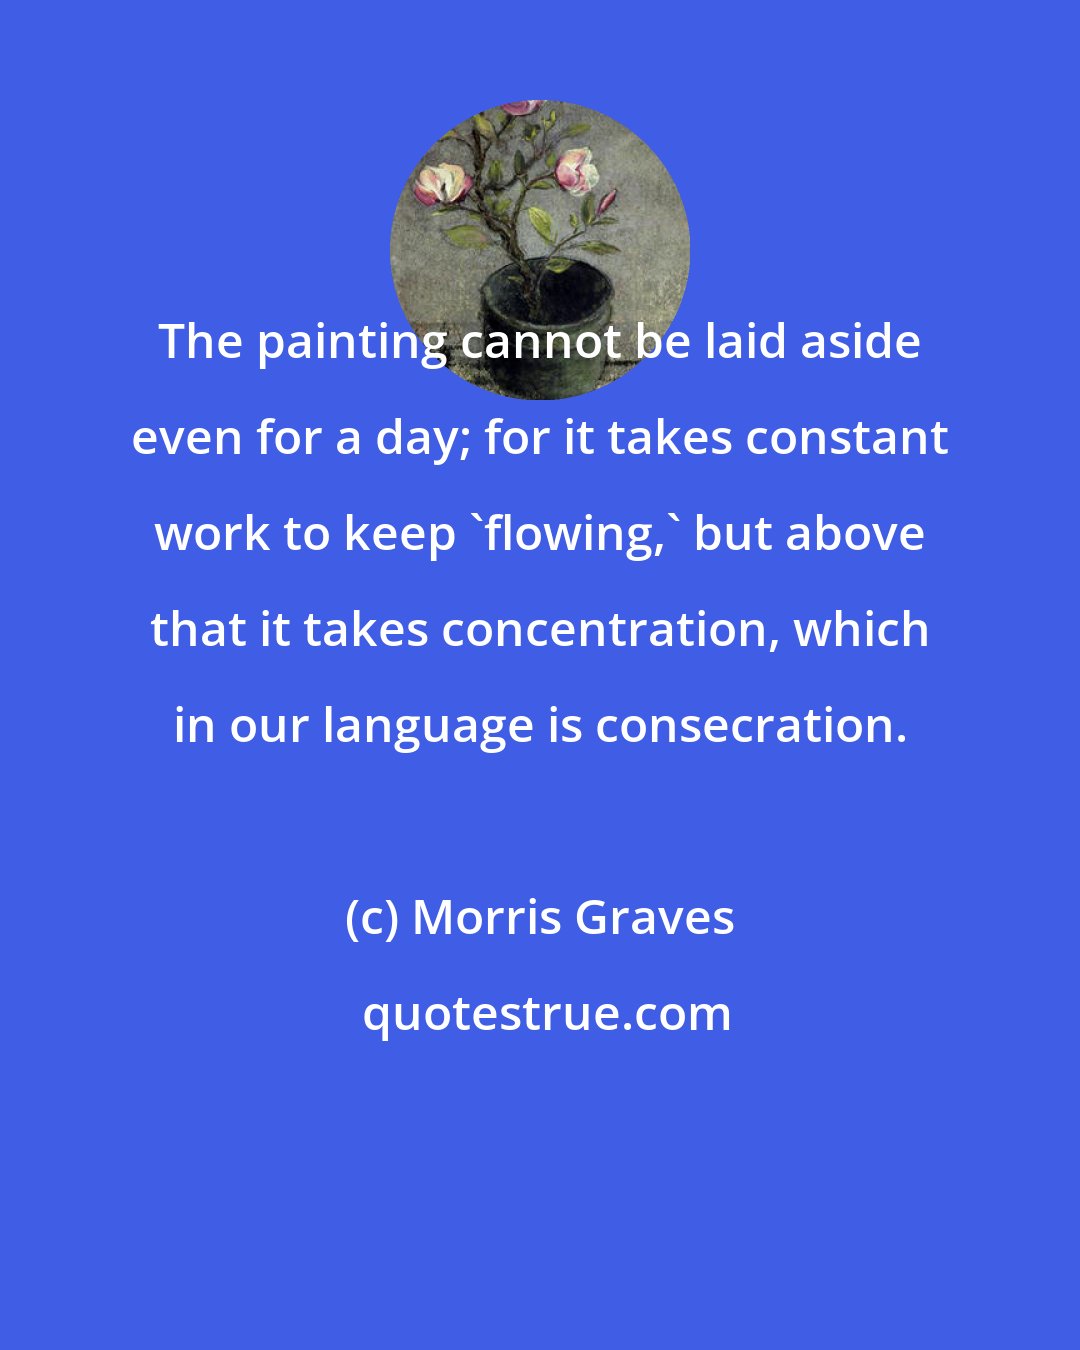 Morris Graves: The painting cannot be laid aside even for a day; for it takes constant work to keep 'flowing,' but above that it takes concentration, which in our language is consecration.